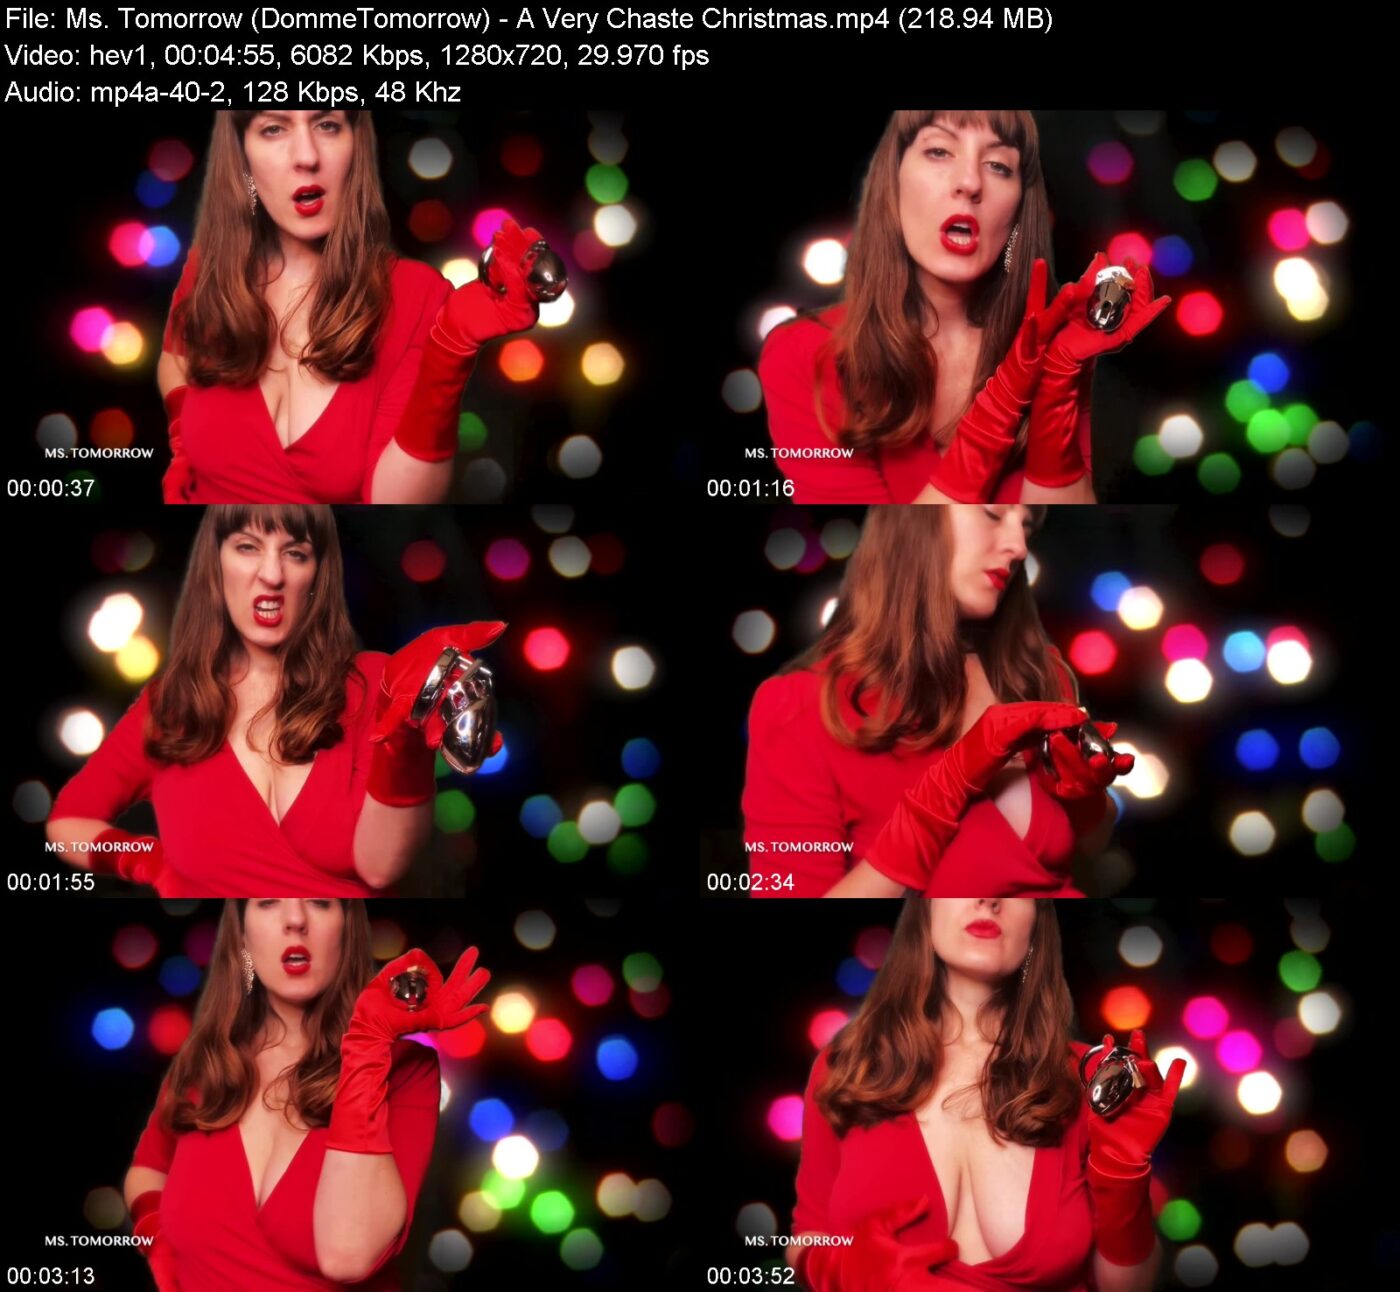 Actress: Ms. Tomorrow (DommeTomorrow). Title and Studio: A Very Chaste Christmas